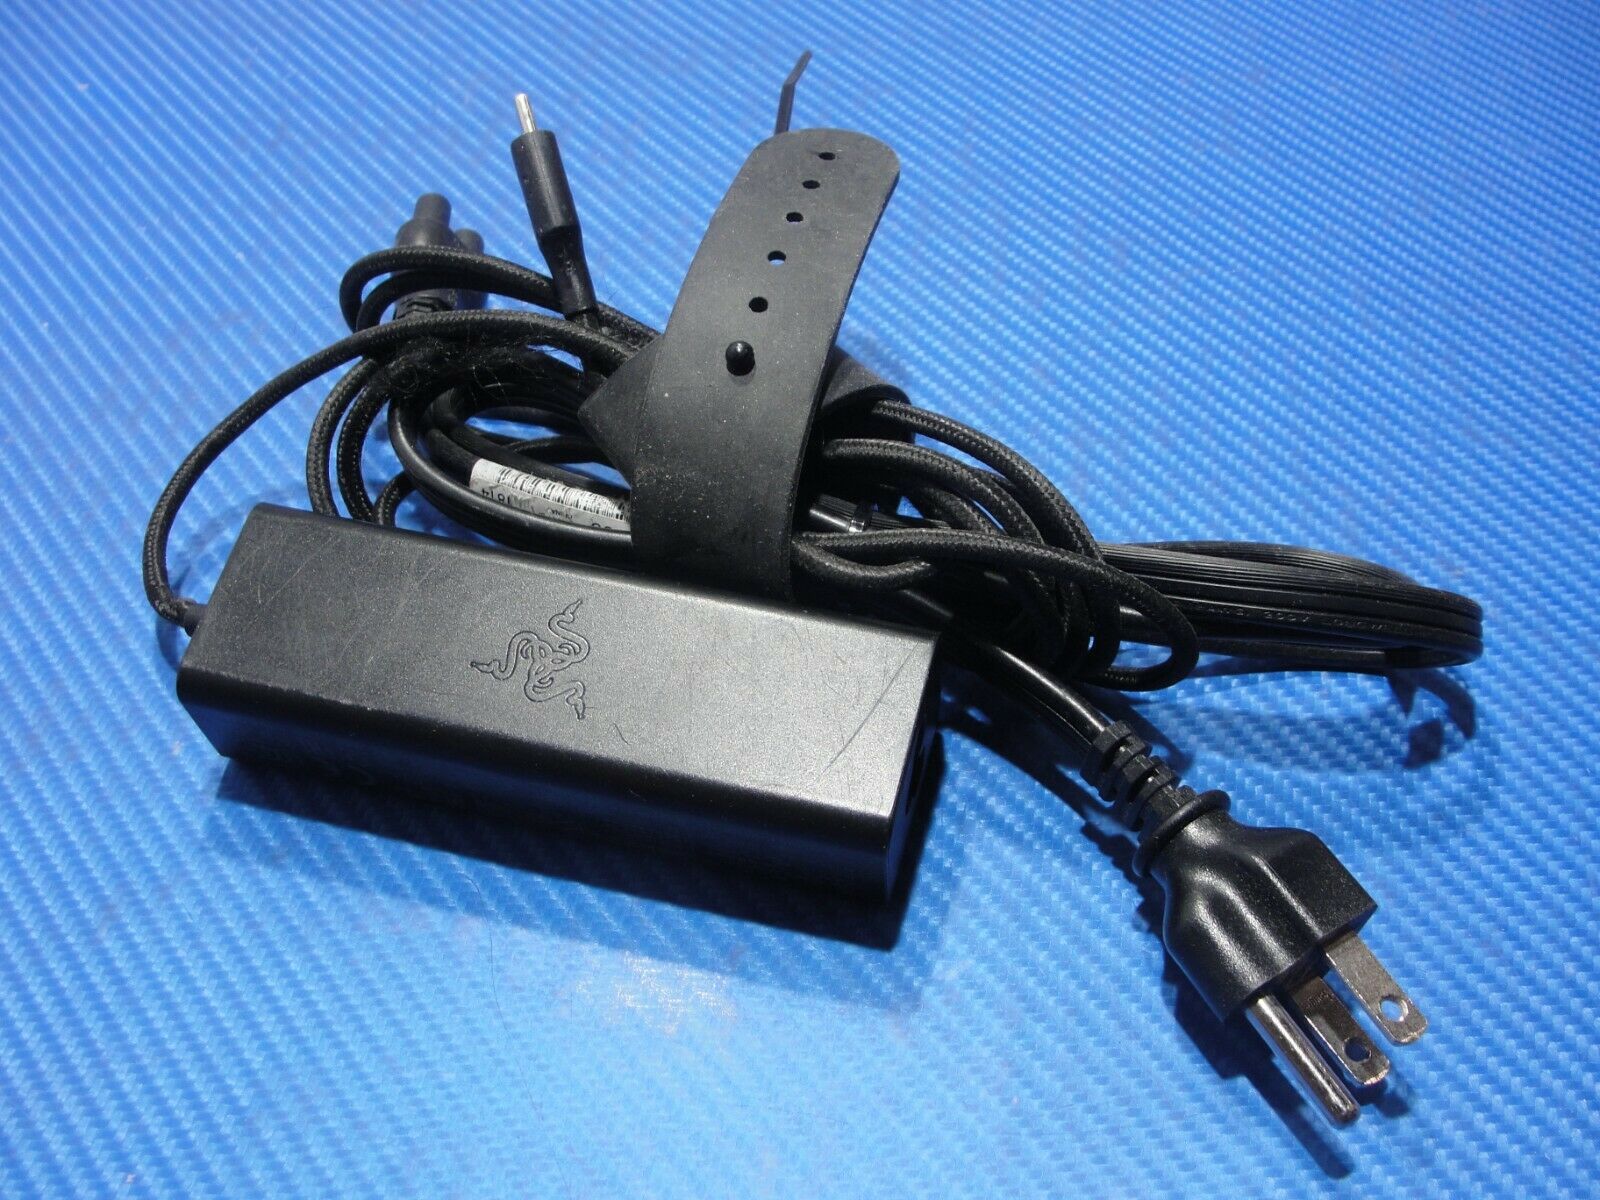 Genuine Alienware AC Adapter Power Charger 20V 2.25A 45W 1643U01100124 - Laptop Parts - Buy Authentic Computer Parts - Top Seller Ebay